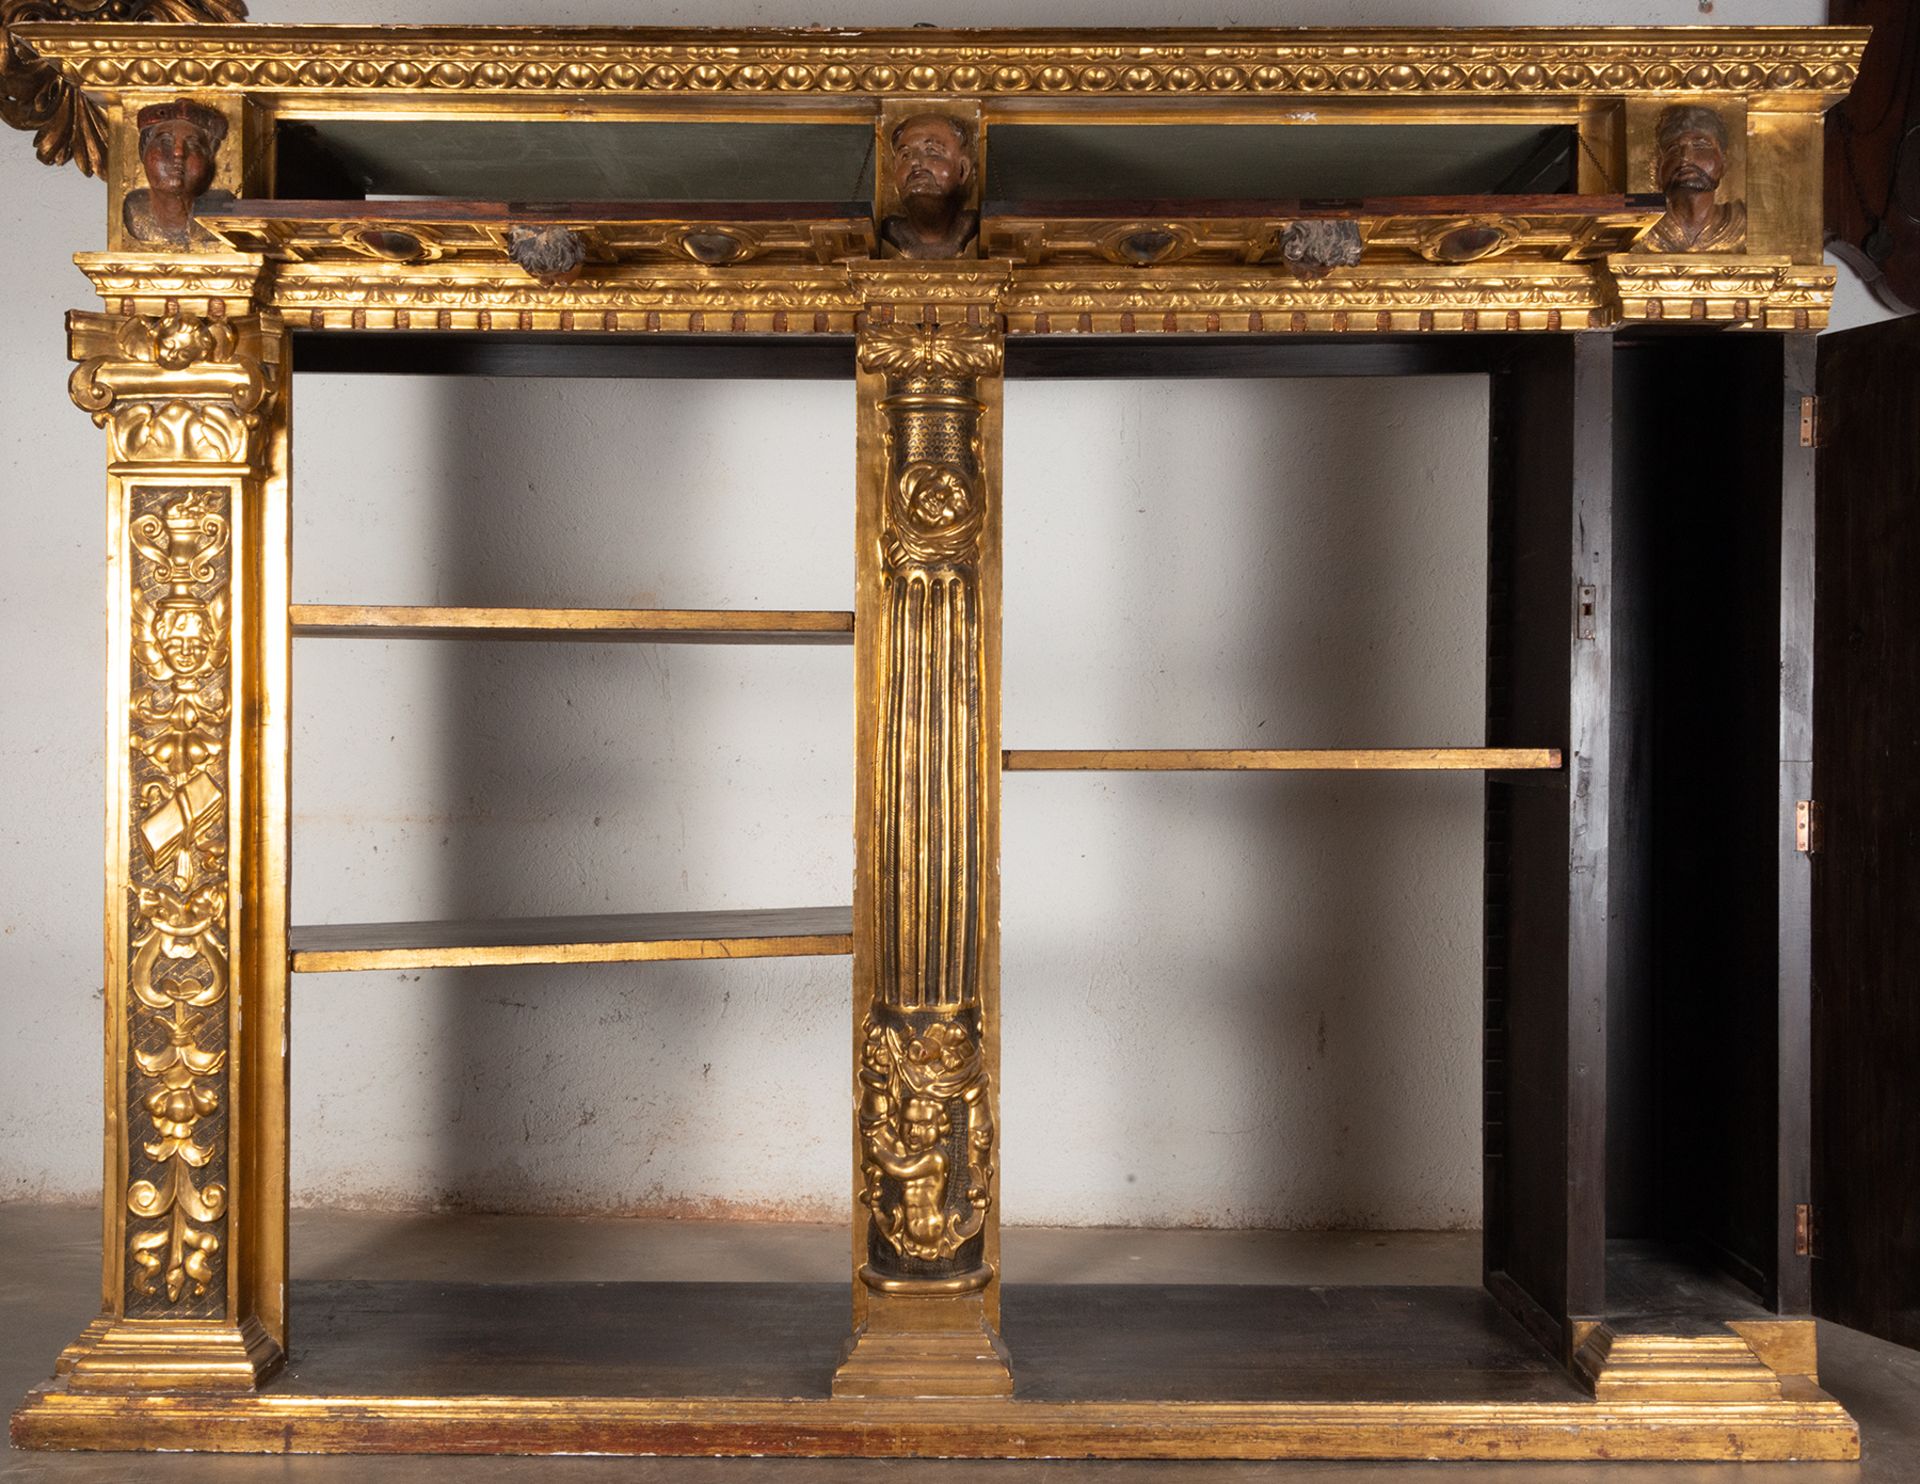 Large Bookcase Furniture (pair of previous batch) made up of a Renaissance Altarpiece with shelves,  - Image 7 of 9